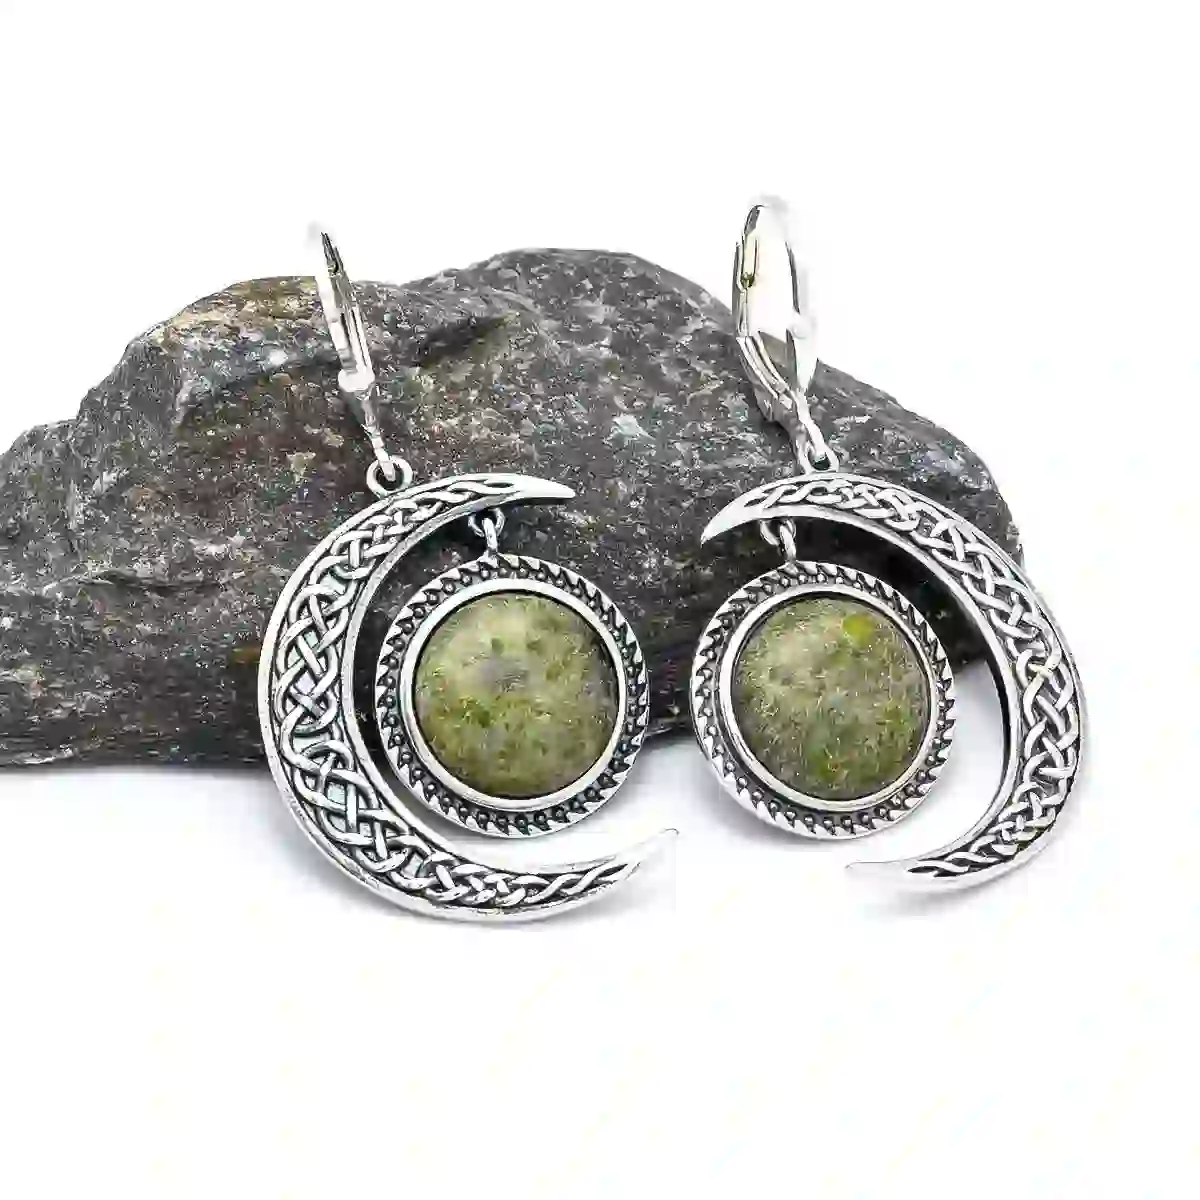 1 Connemara Marble Earring Sterling Silver Celtic Moon And Sun 1...